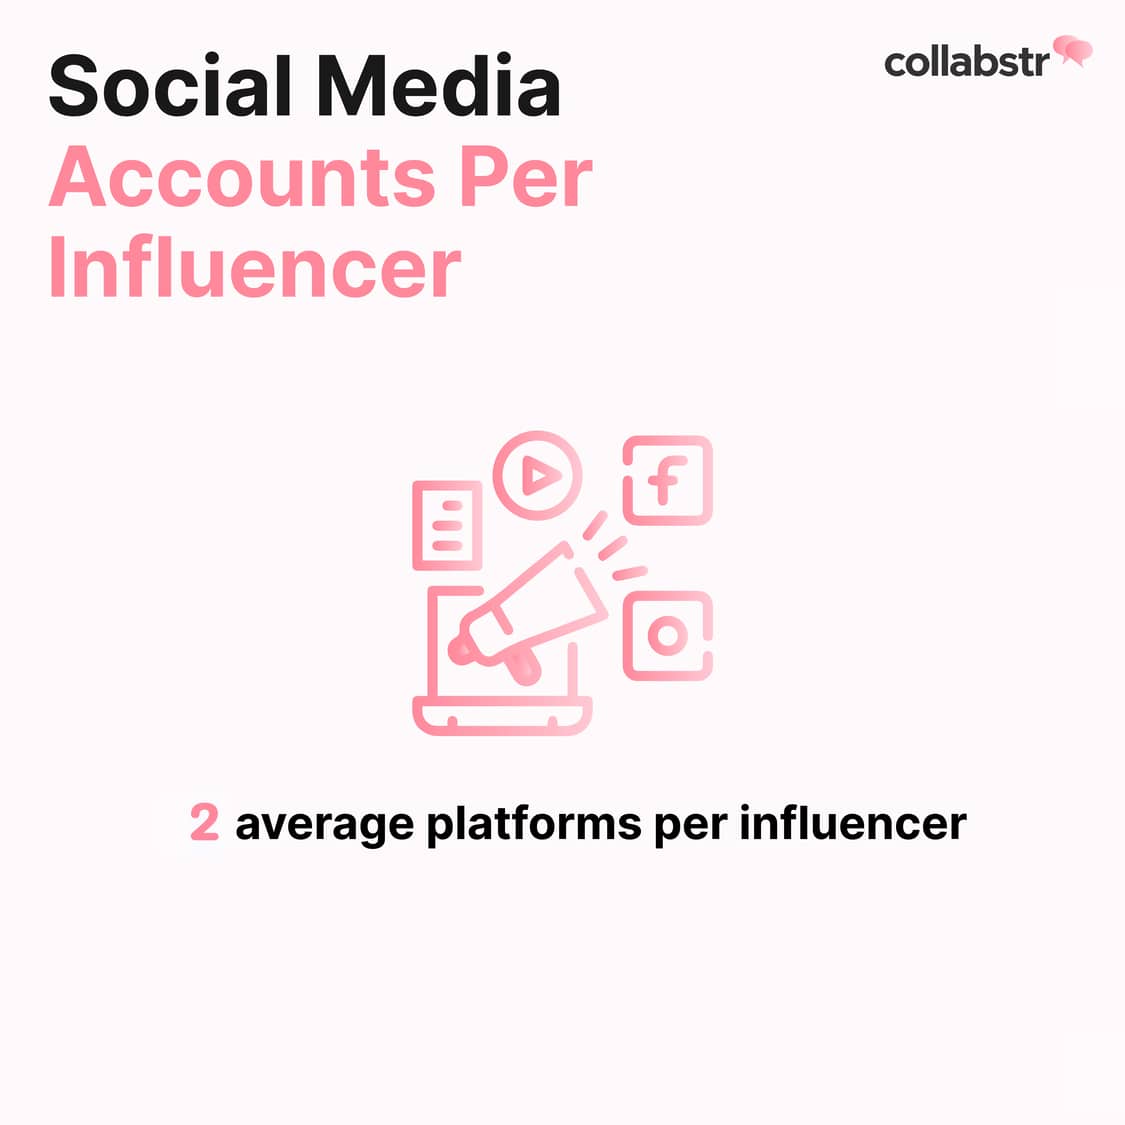 On average, influencers have 1.9 social media accounts.